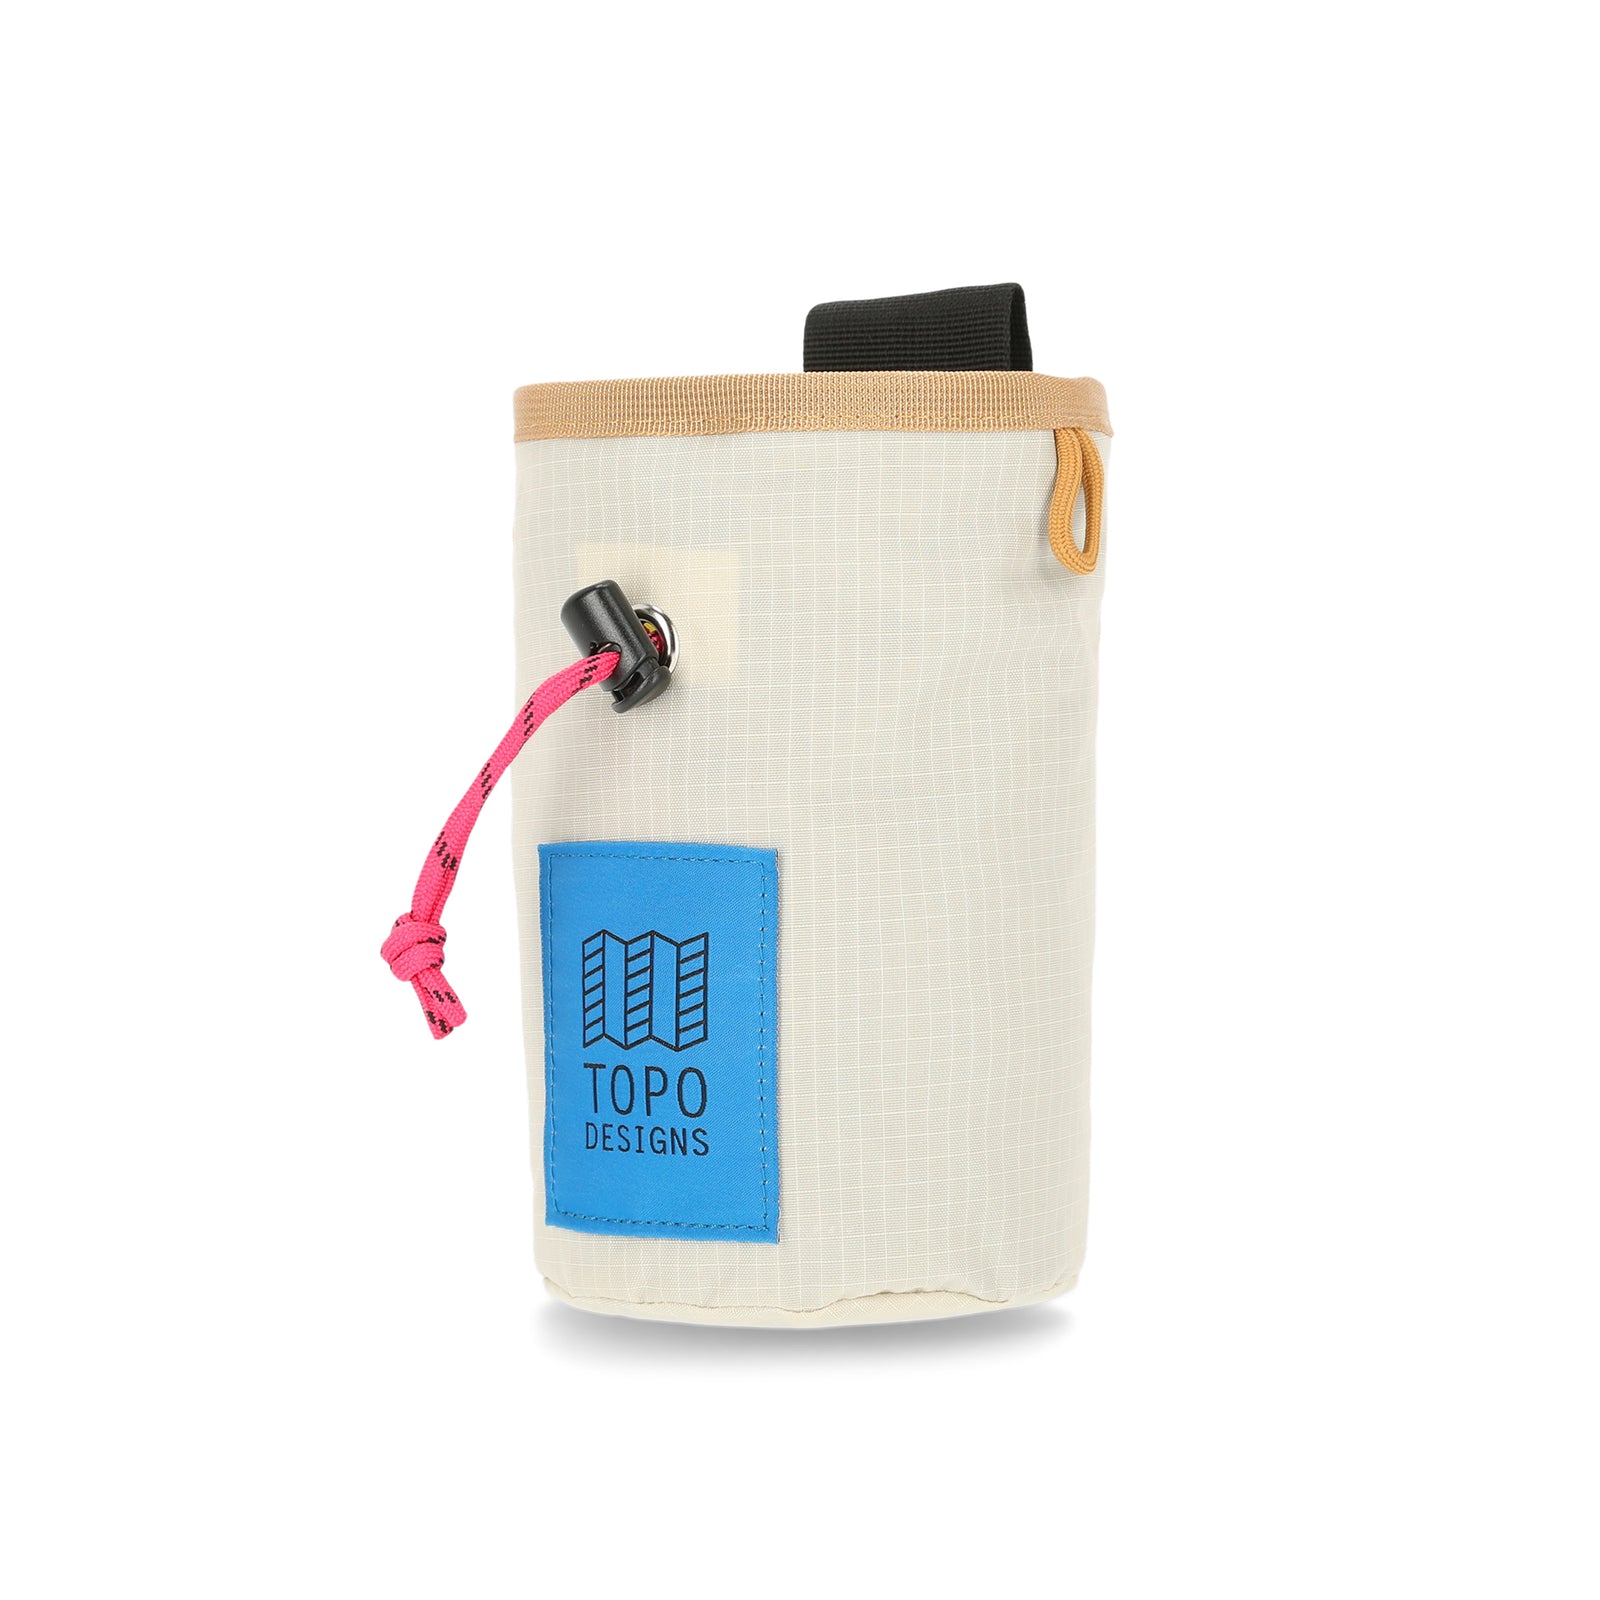 Topo Designs Mountain Chalk Bag for rock climbing and bouldering in lightweight recycled "Bone White" nylon.